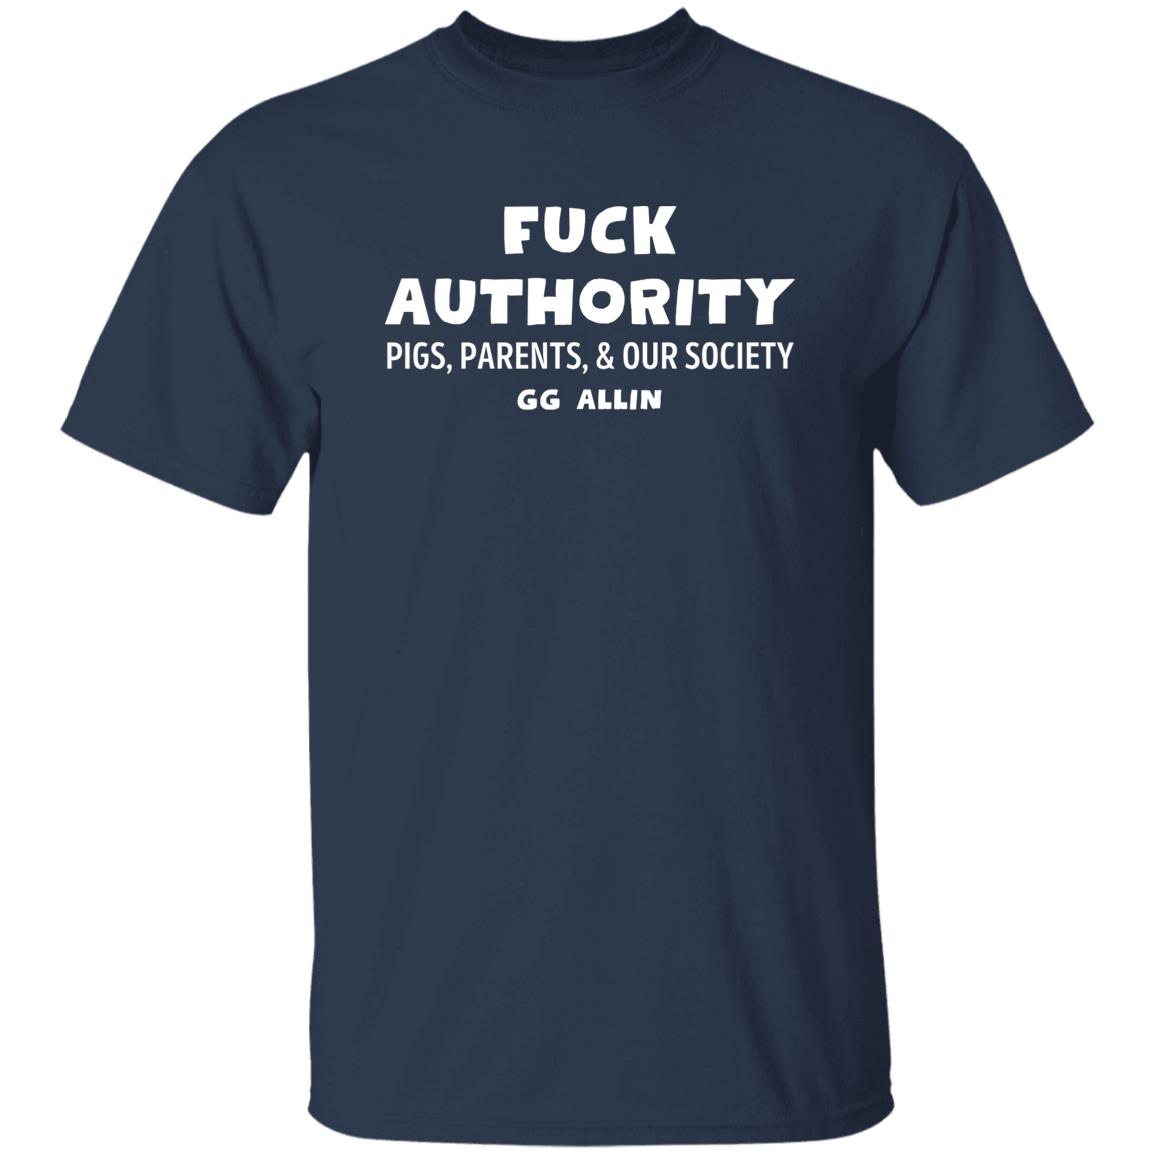 GG Allin Fuck Authority Pigs Parents & Our Society T-shirt, Offensive Punk Rock Shirt